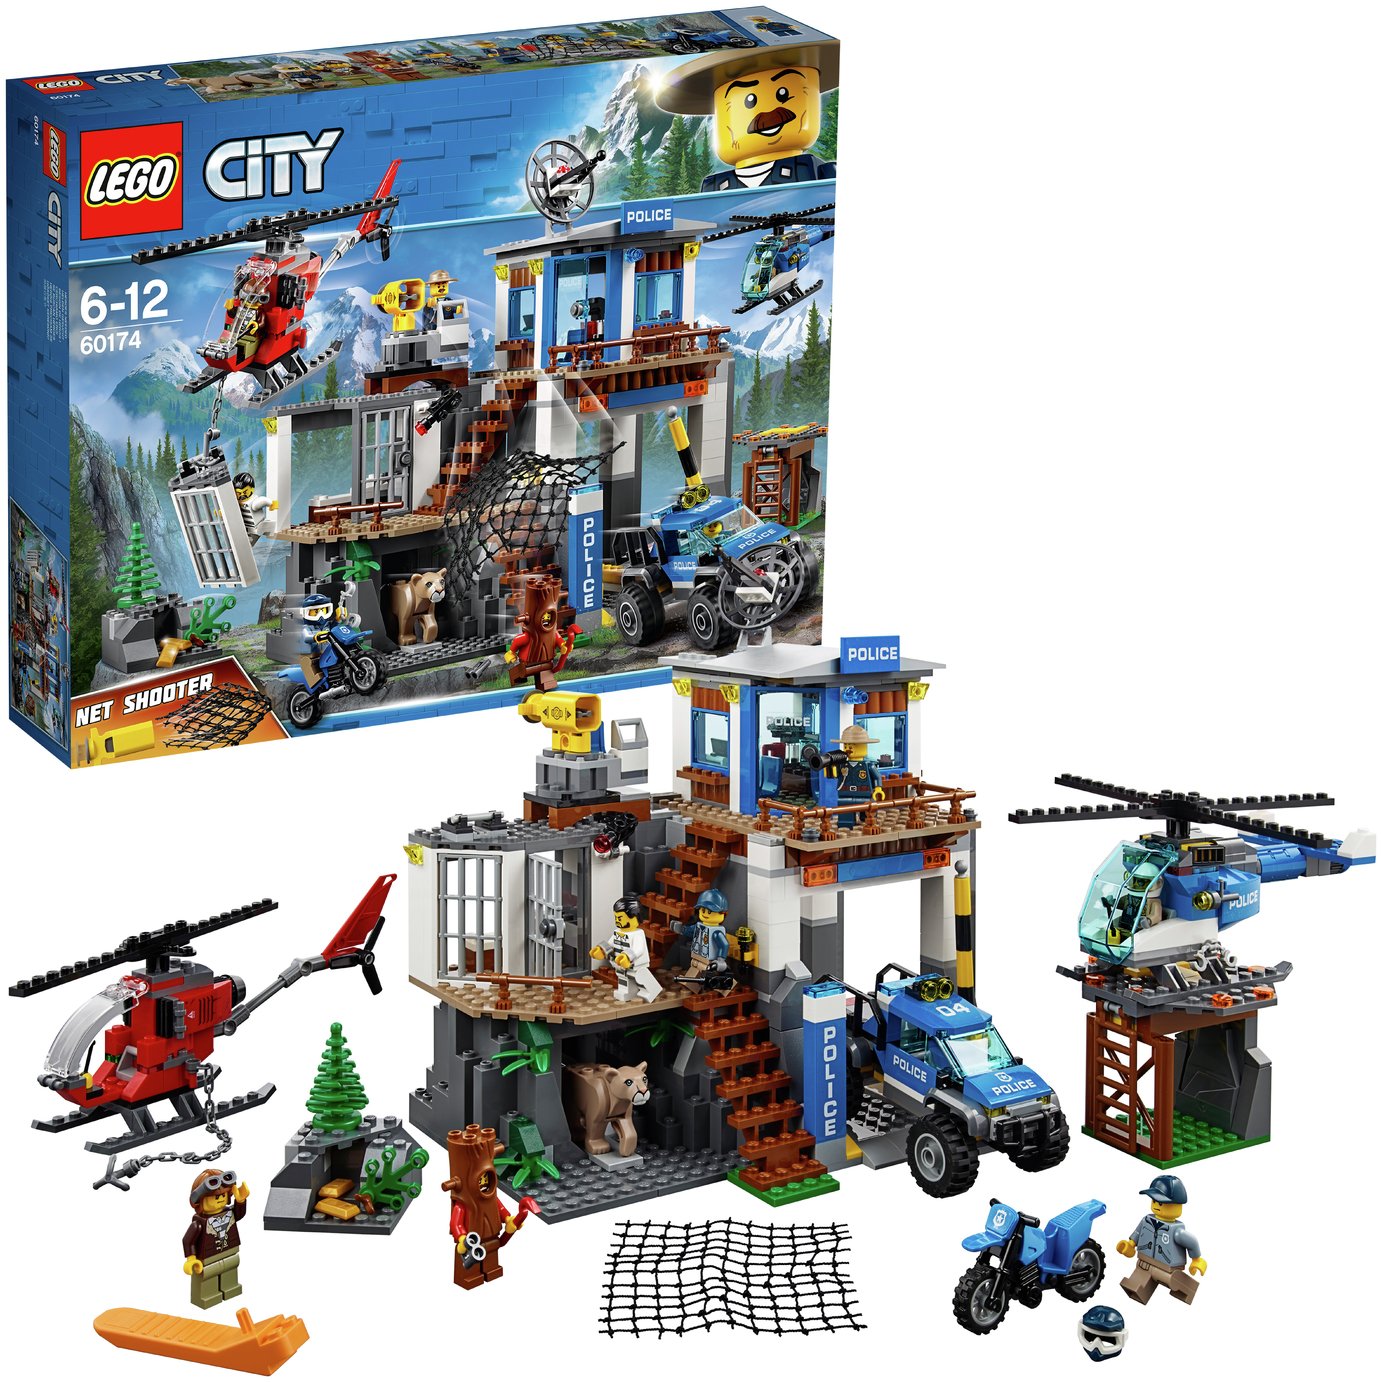 LEGO City Police Mountain Headquarter Toy Helicopter - 60174